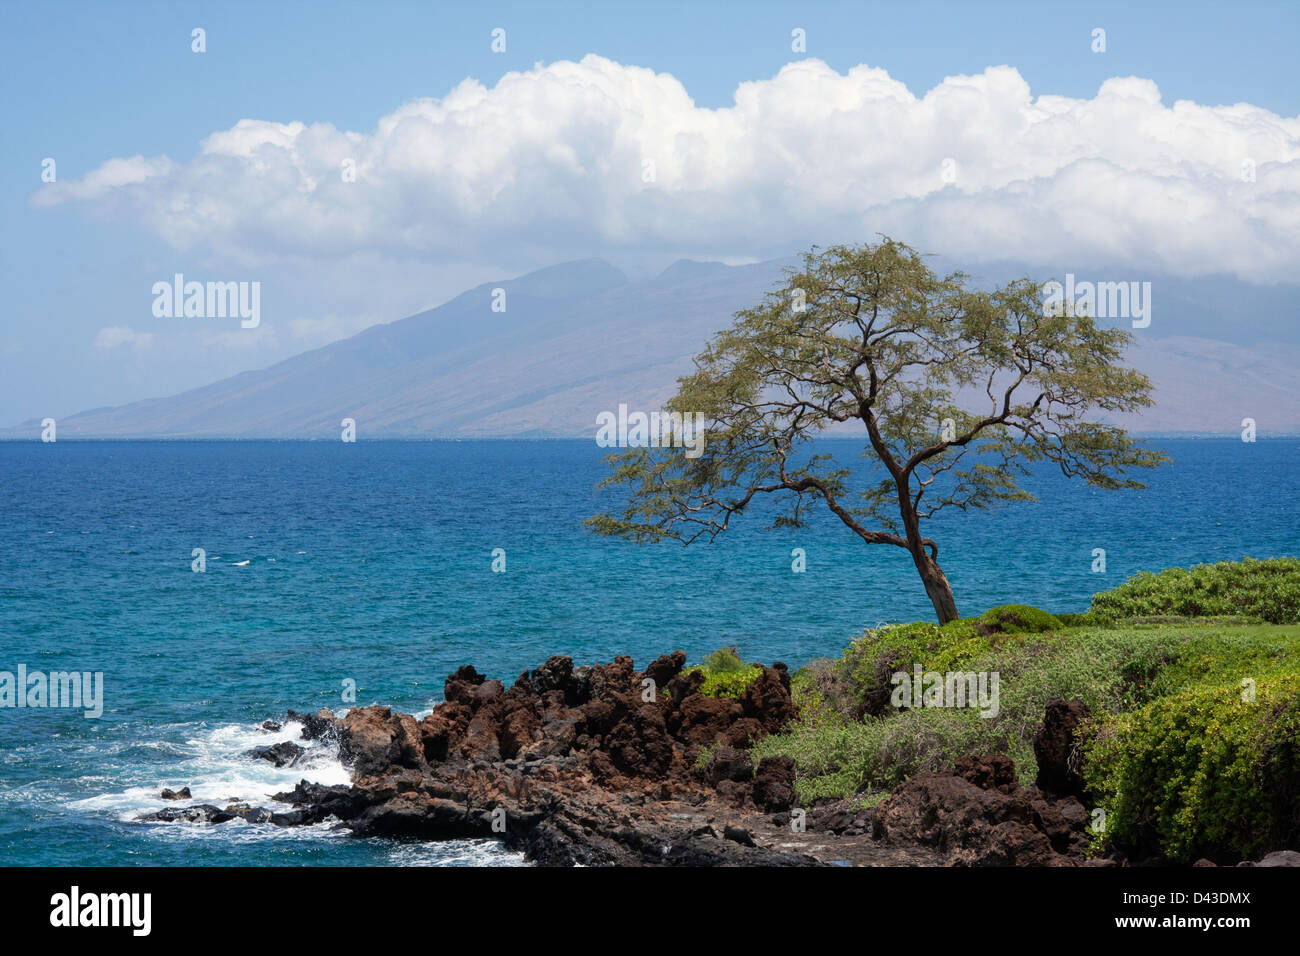 Lava rock formation and Ocean view in Maui, Hawaii Stock Photo